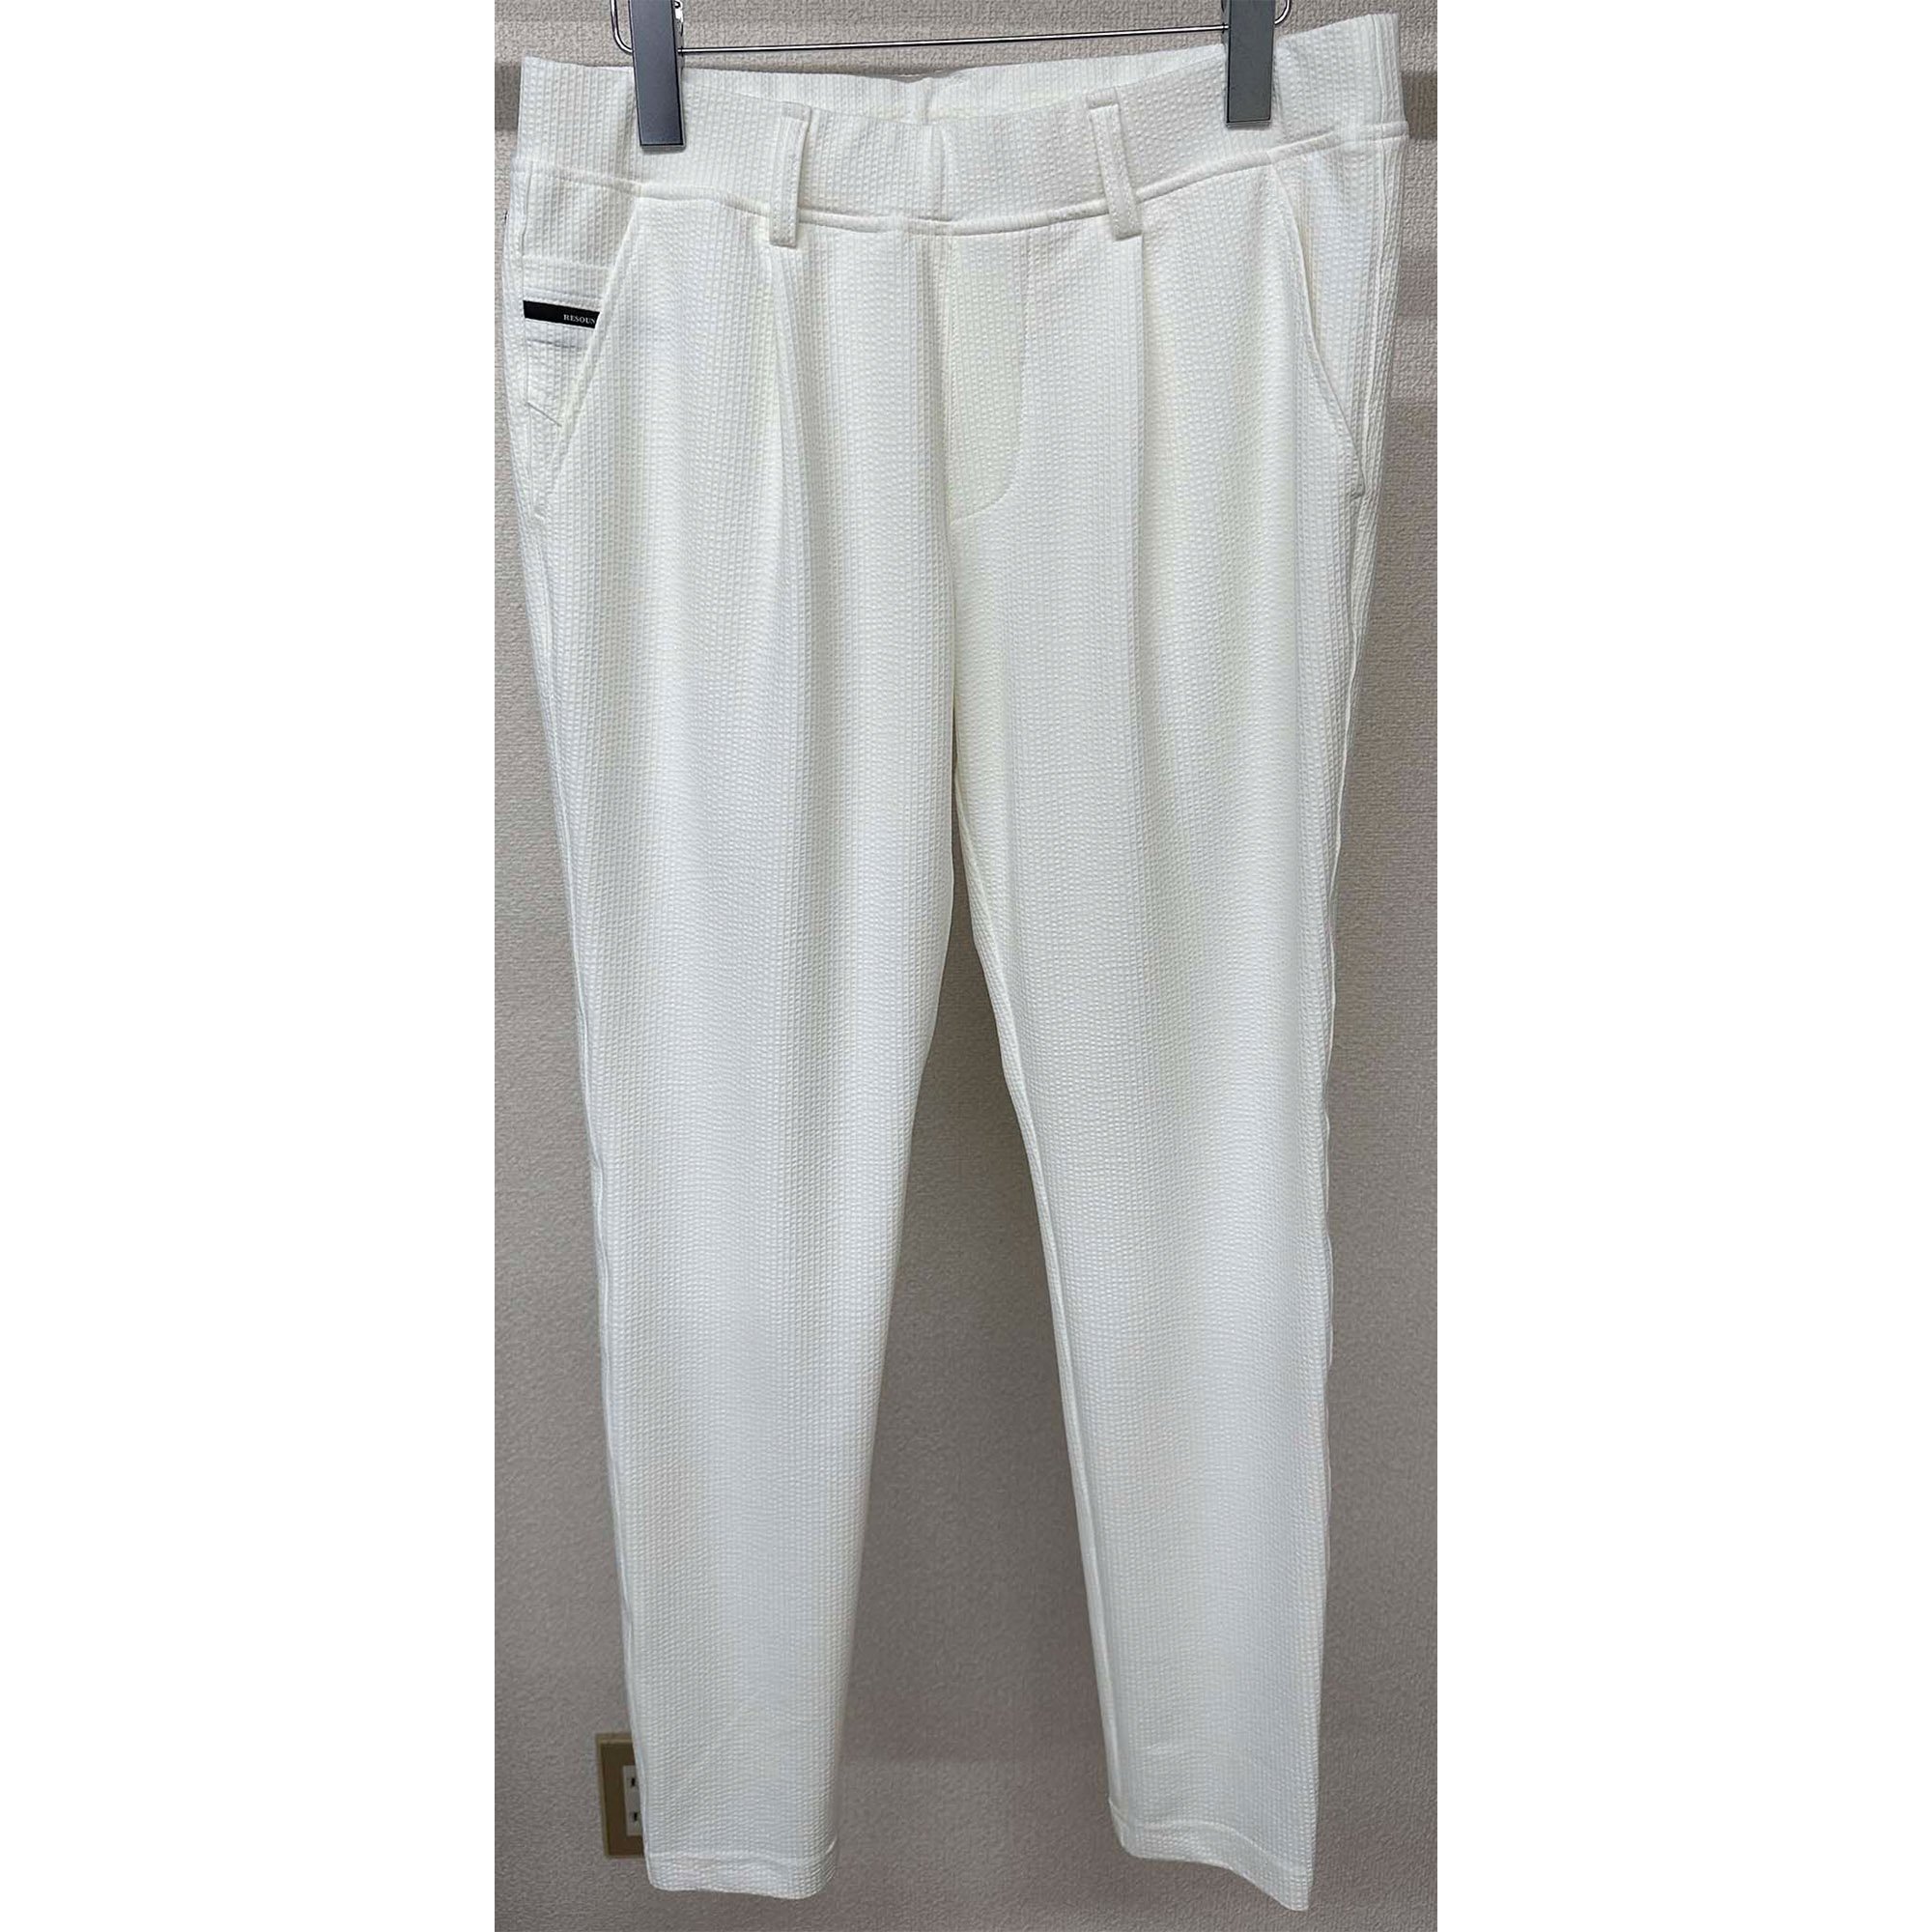 <img class='new_mark_img1' src='https://img.shop-pro.jp/img/new/icons1.gif' style='border:none;display:inline;margin:0px;padding:0px;width:auto;' />CHRIS EASY TUCK PANTS WHITE